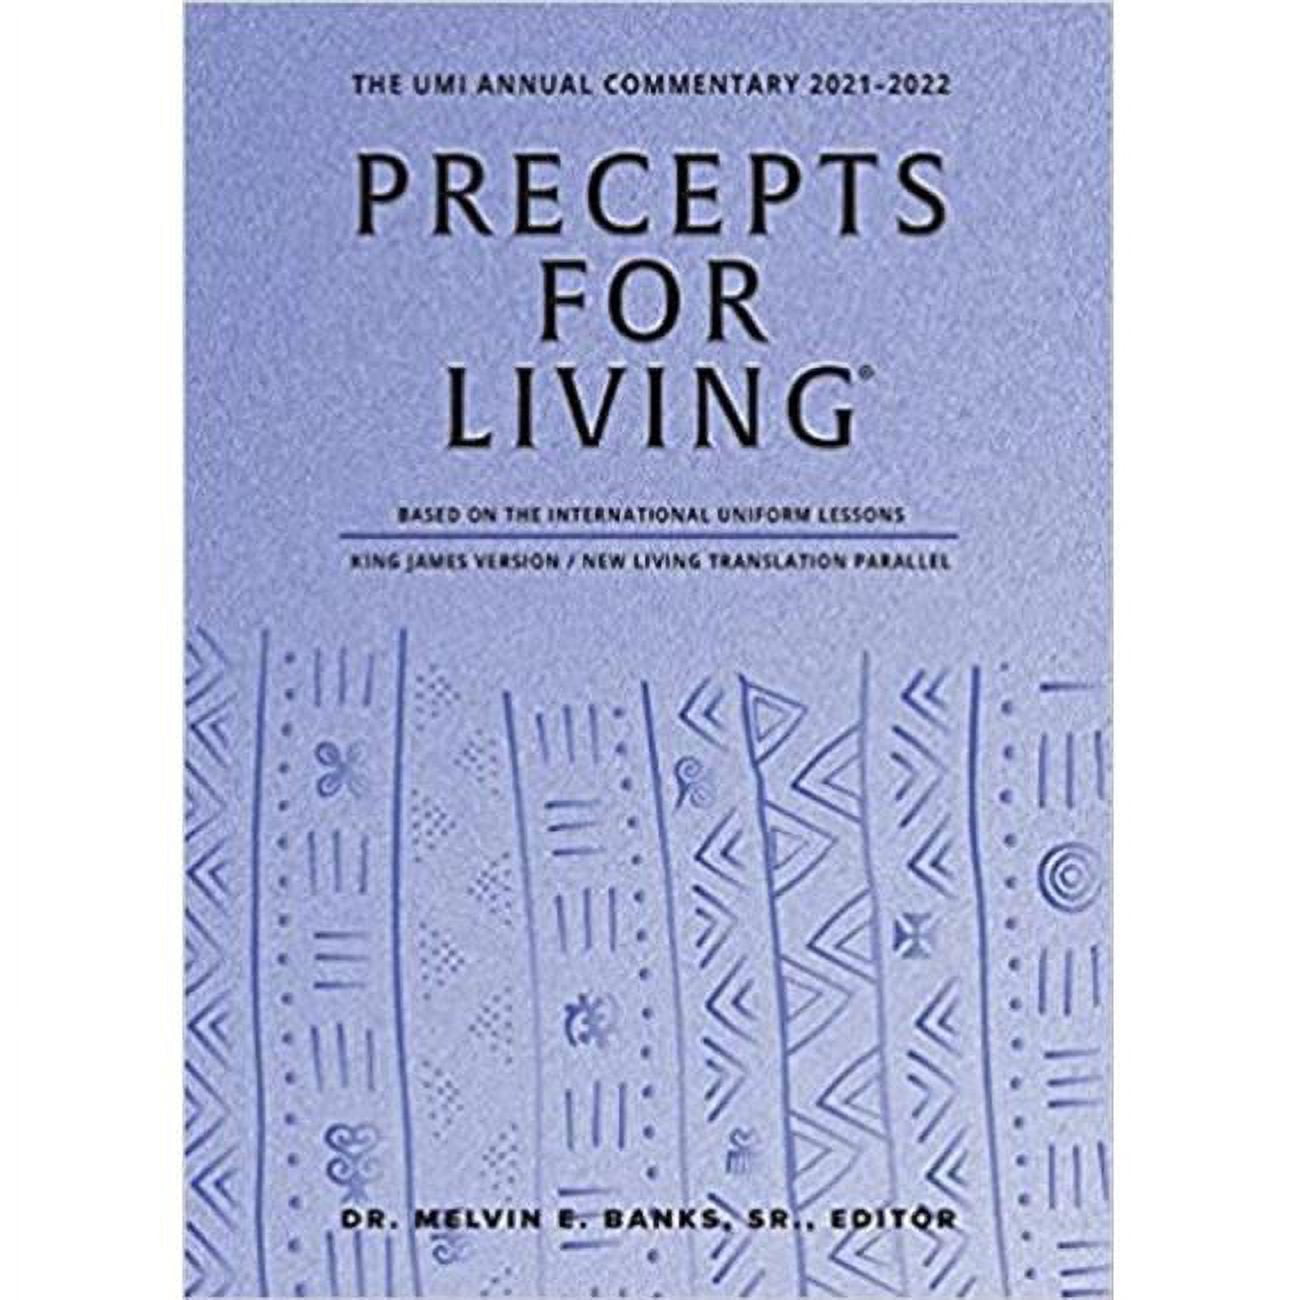 265500 Precepts for Living - The UMI Annual Bible Commentary 2021-2022 -  Urban Ministries